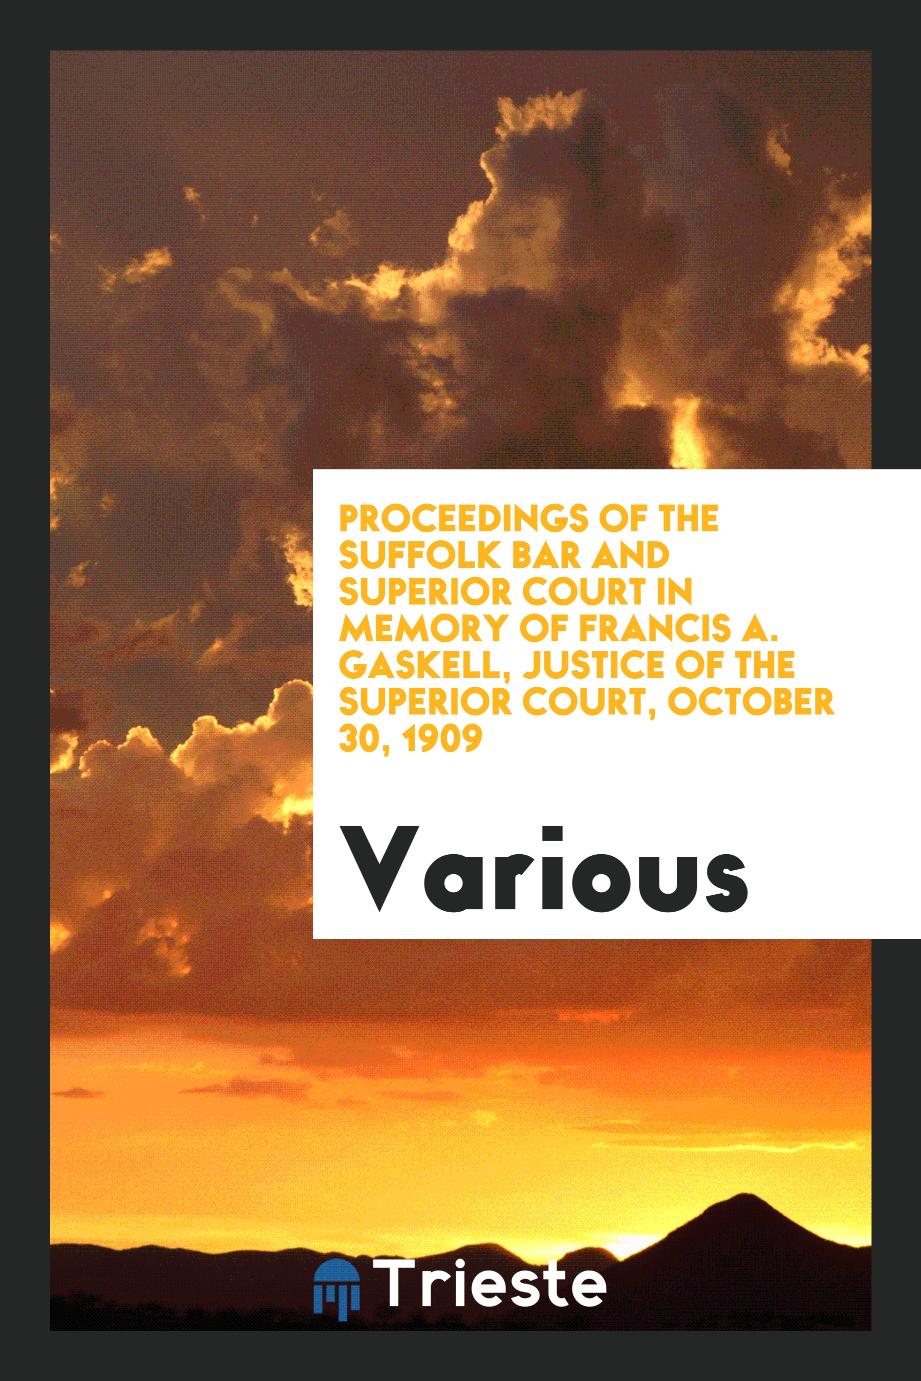 Proceedings of the Suffolk Bar and Superior Court in Memory of Francis A. Gaskell, Justice of the Superior Court, October 30, 1909